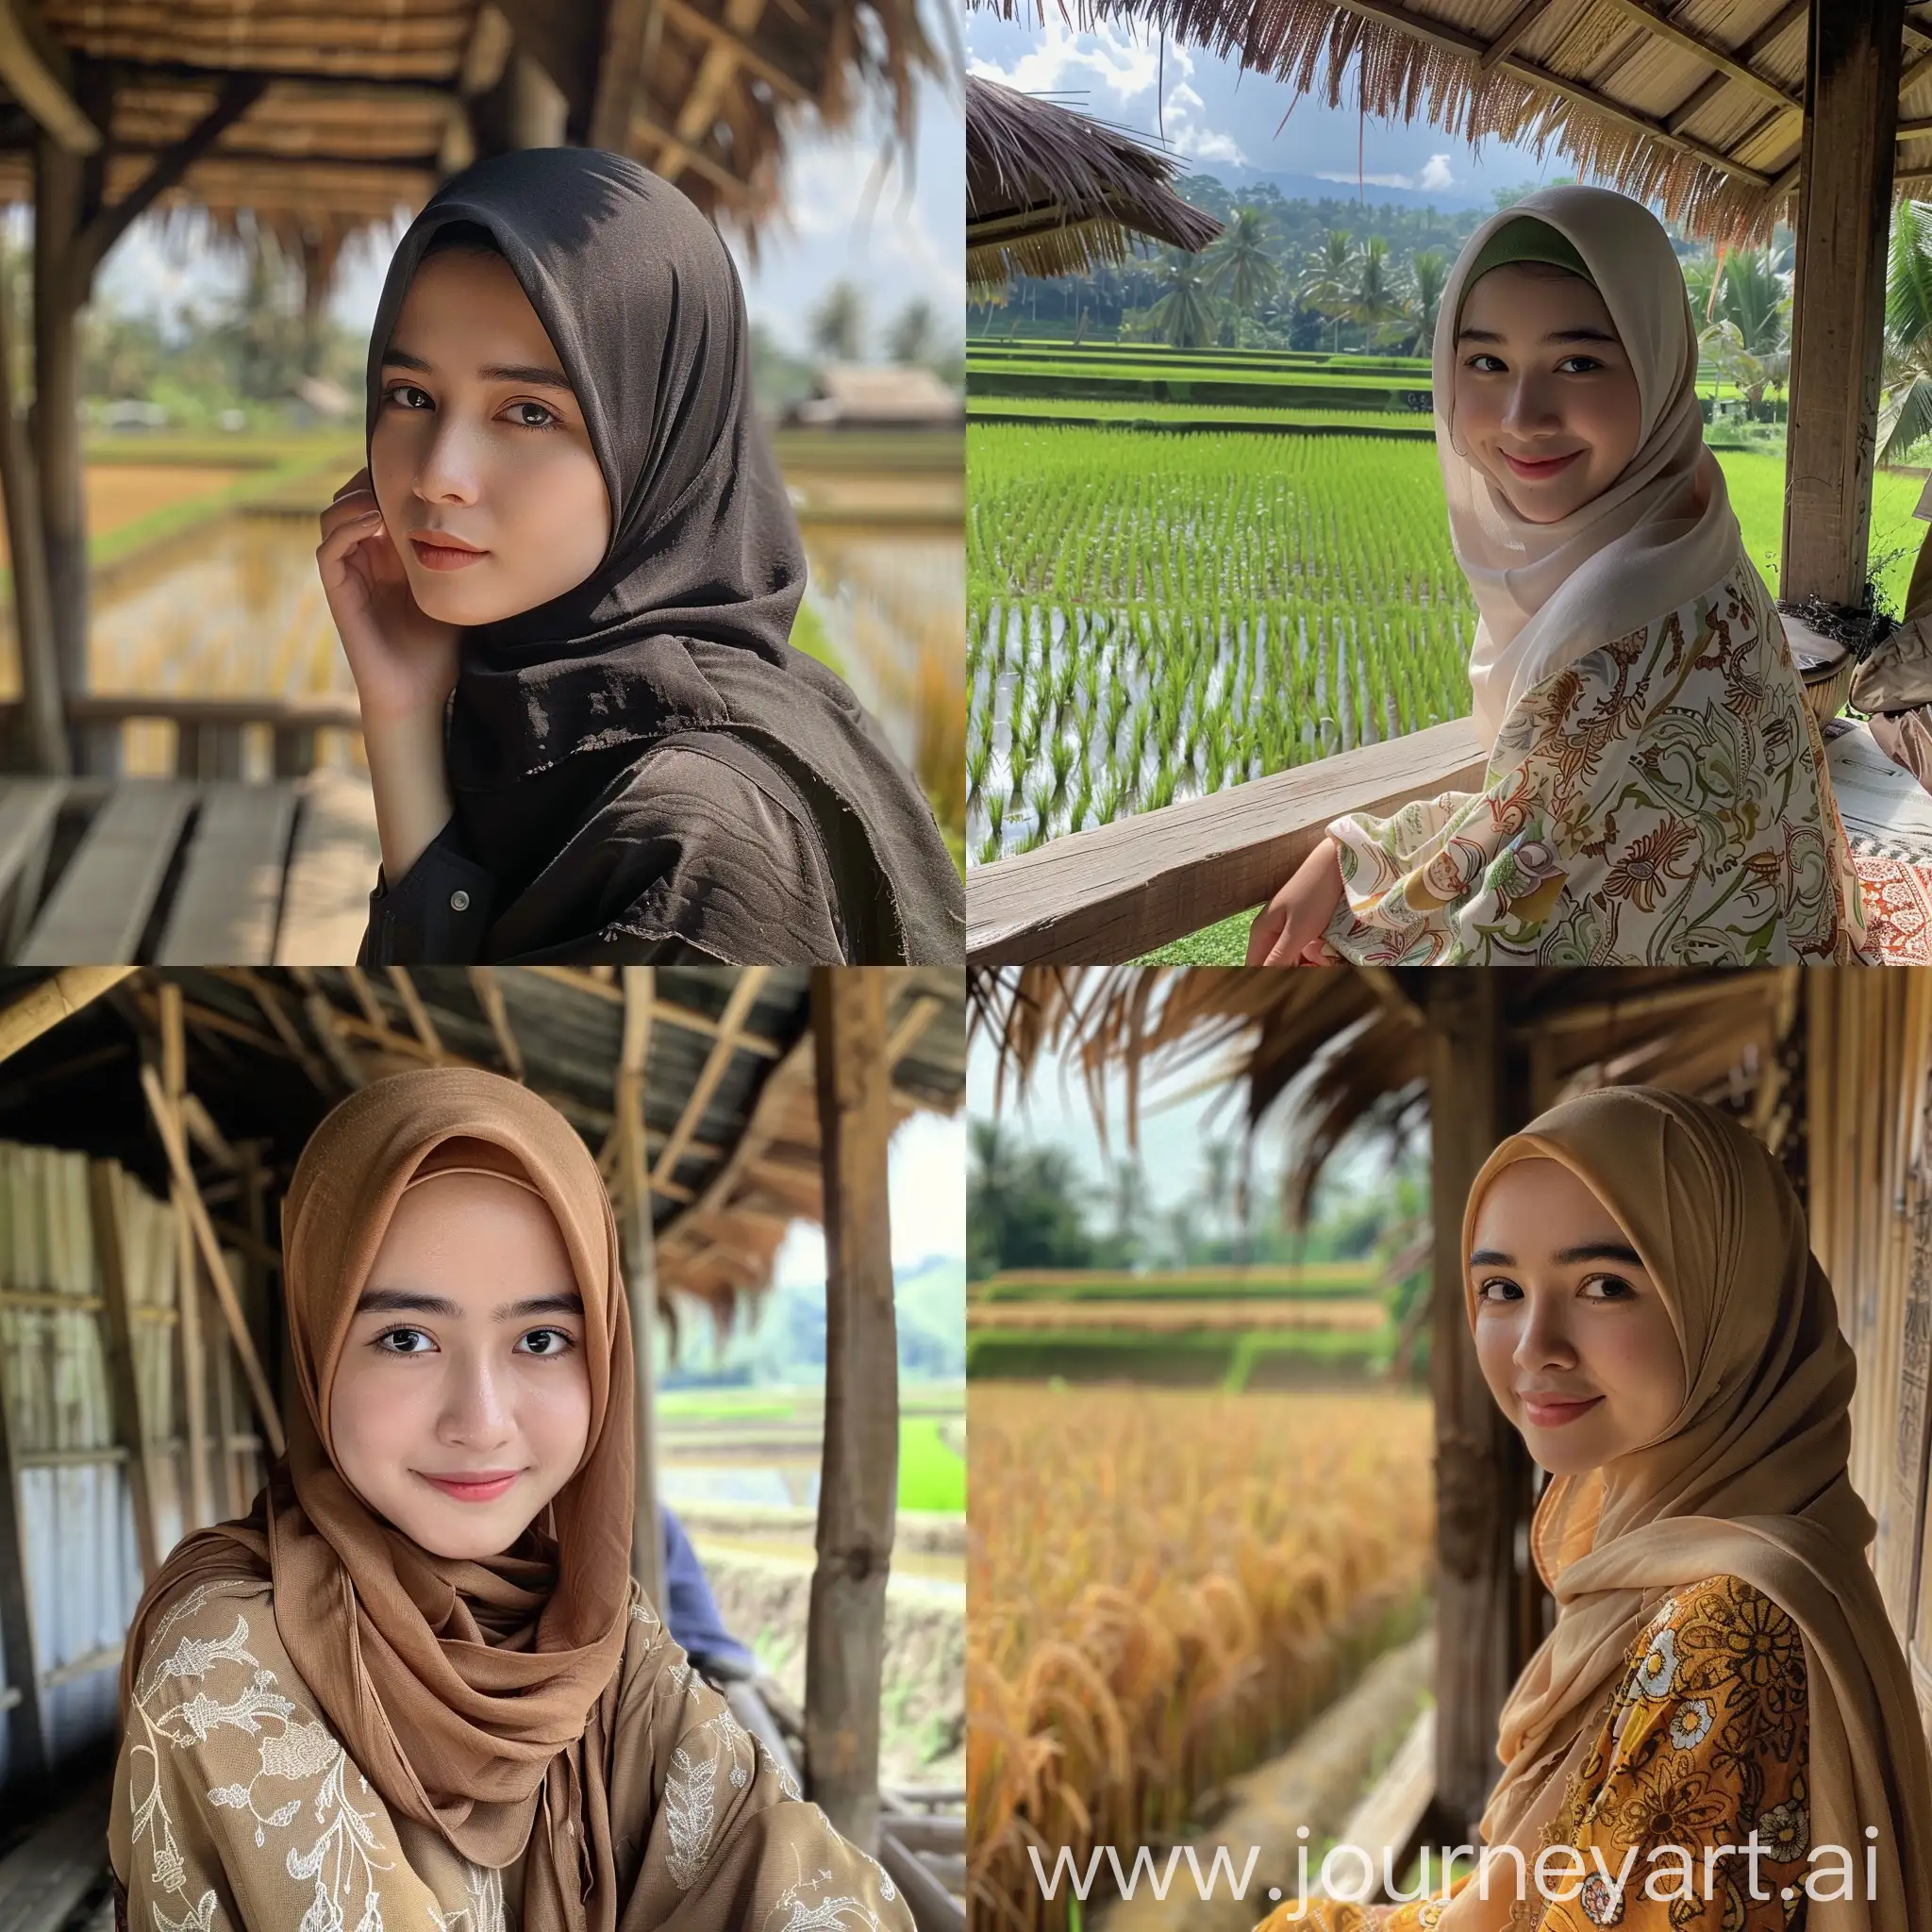 1 Indonesian girl, hijab, 22 years old, influencer, beauty, in the rice fields, make-up, sitting in a wooden hut, no effect, selfie, iphone selfie, no filter, natural iphone photo 